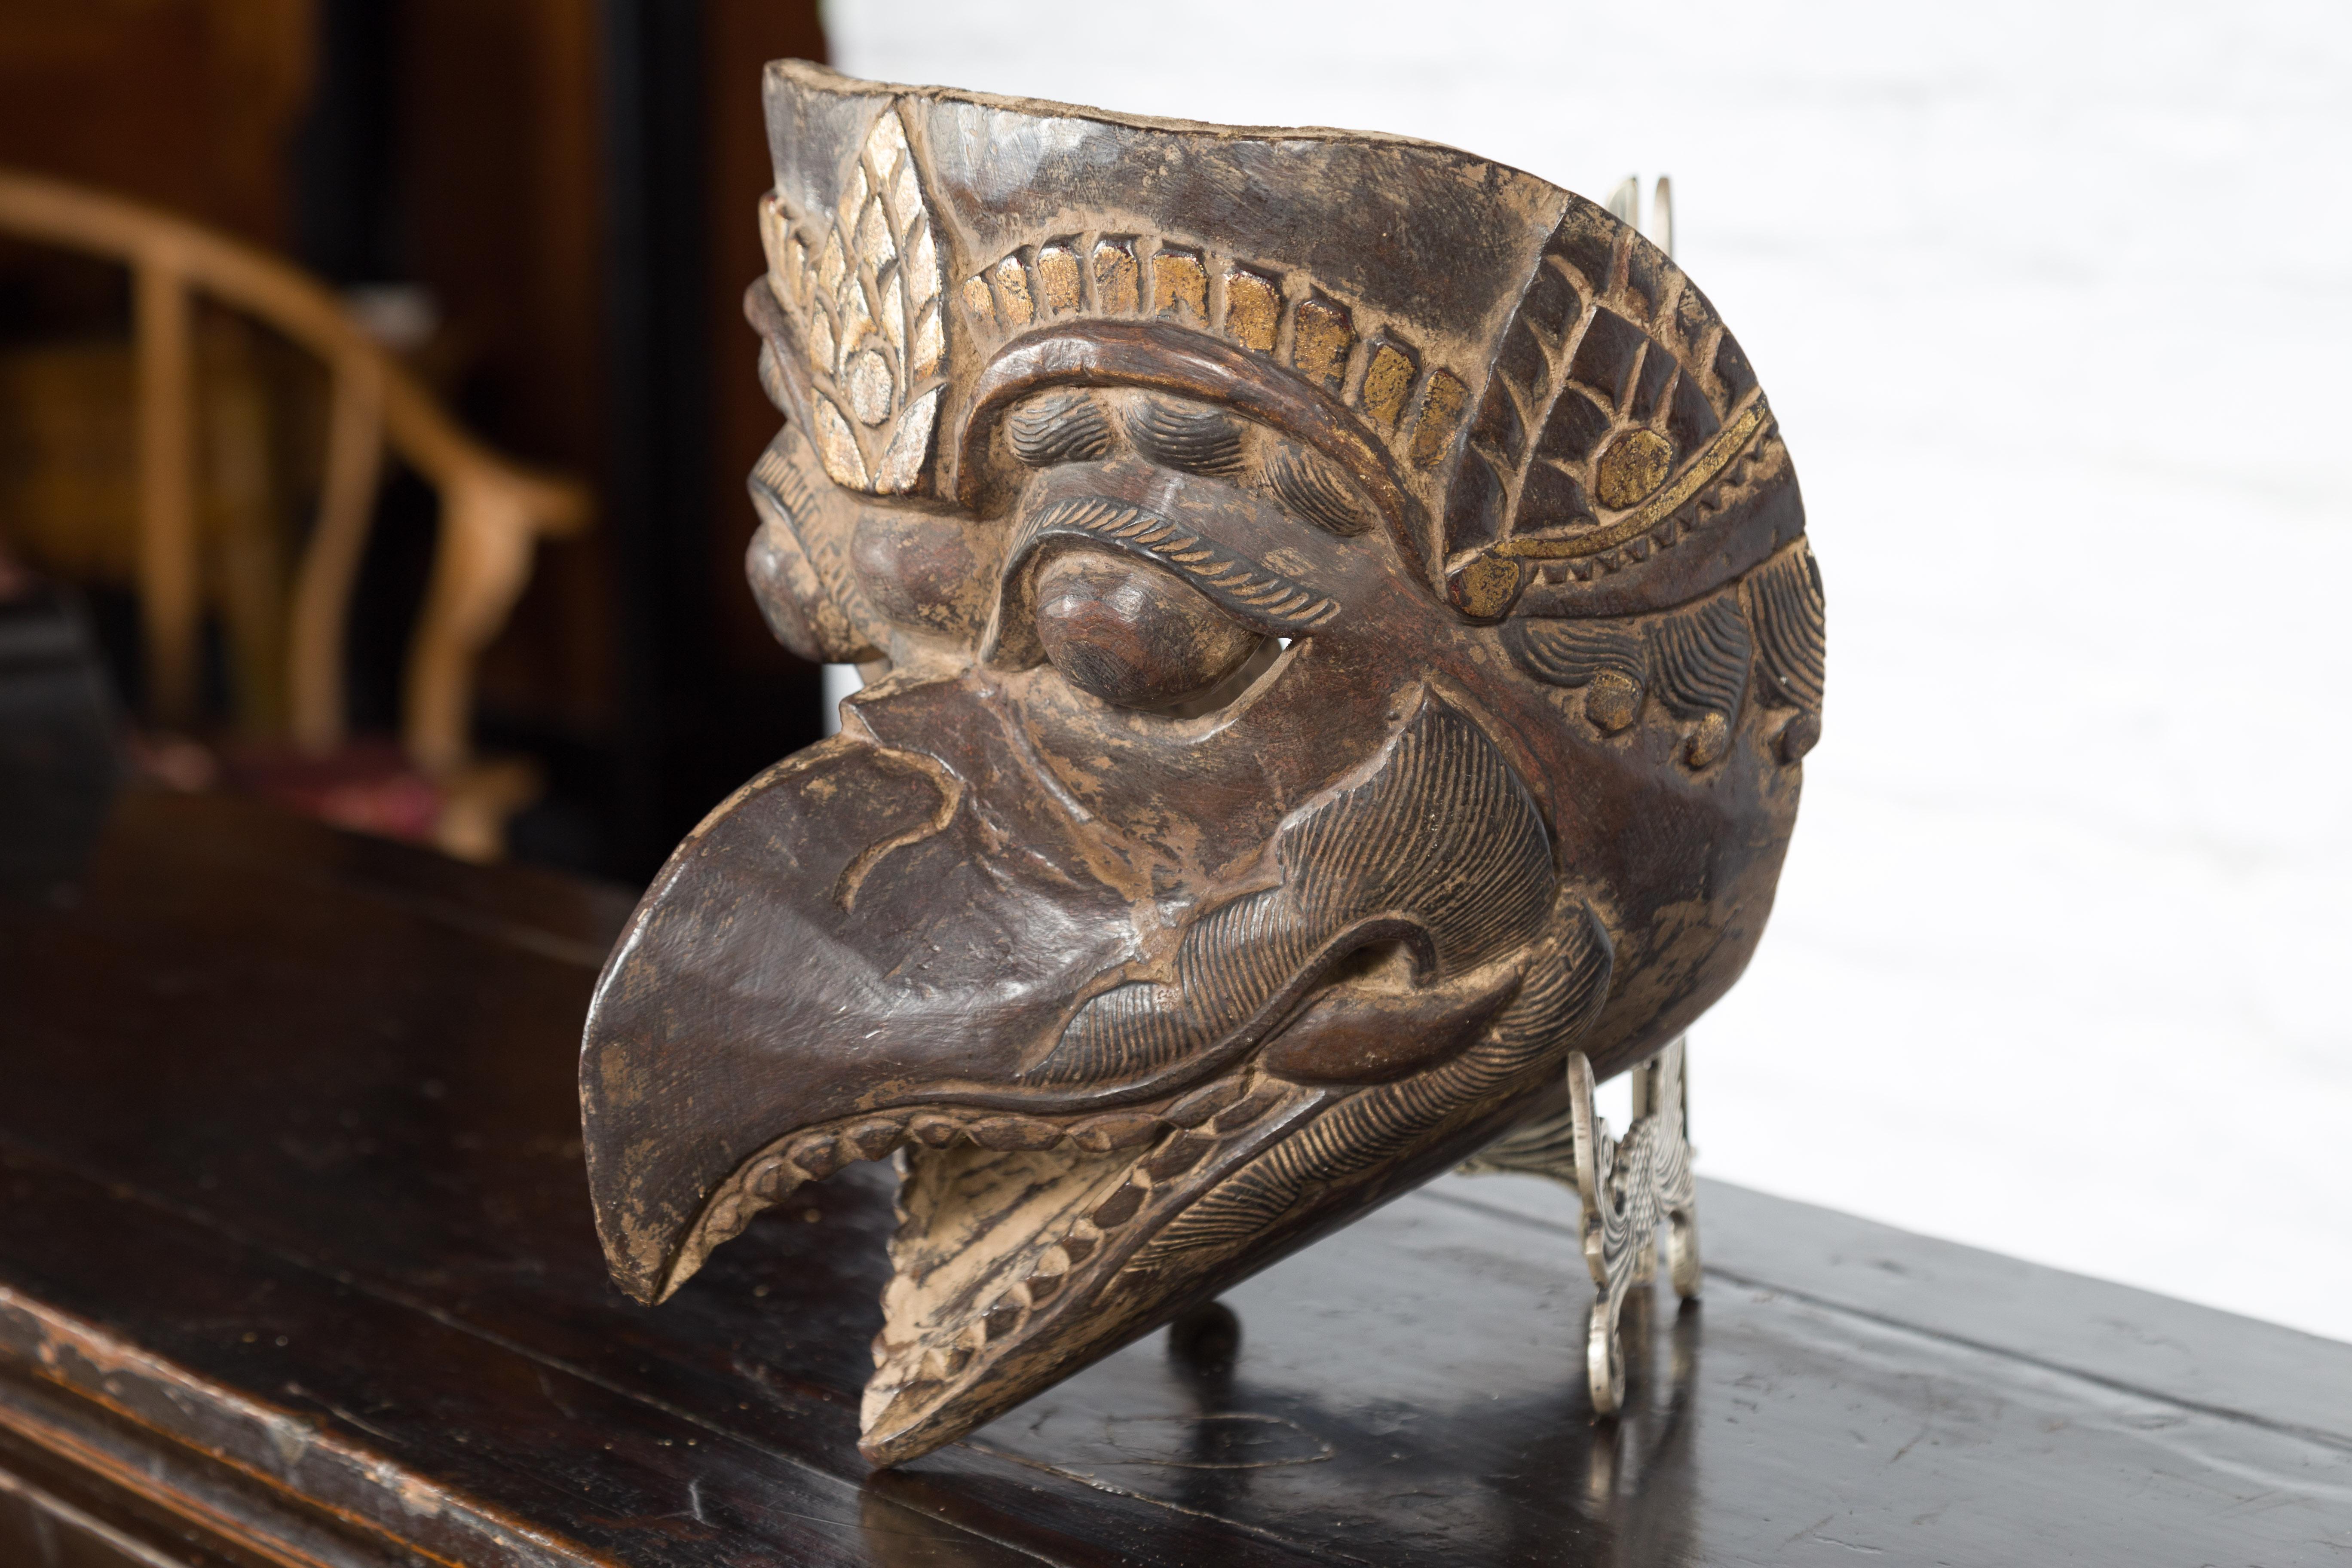 An Indonesian tribal carved wooden mythical animal mask from the island of Lombok located East of Bali and Java. Hand-crafted on the island of Lombok, this wooden mask captures our immediate attention with its striking features a nice patina.